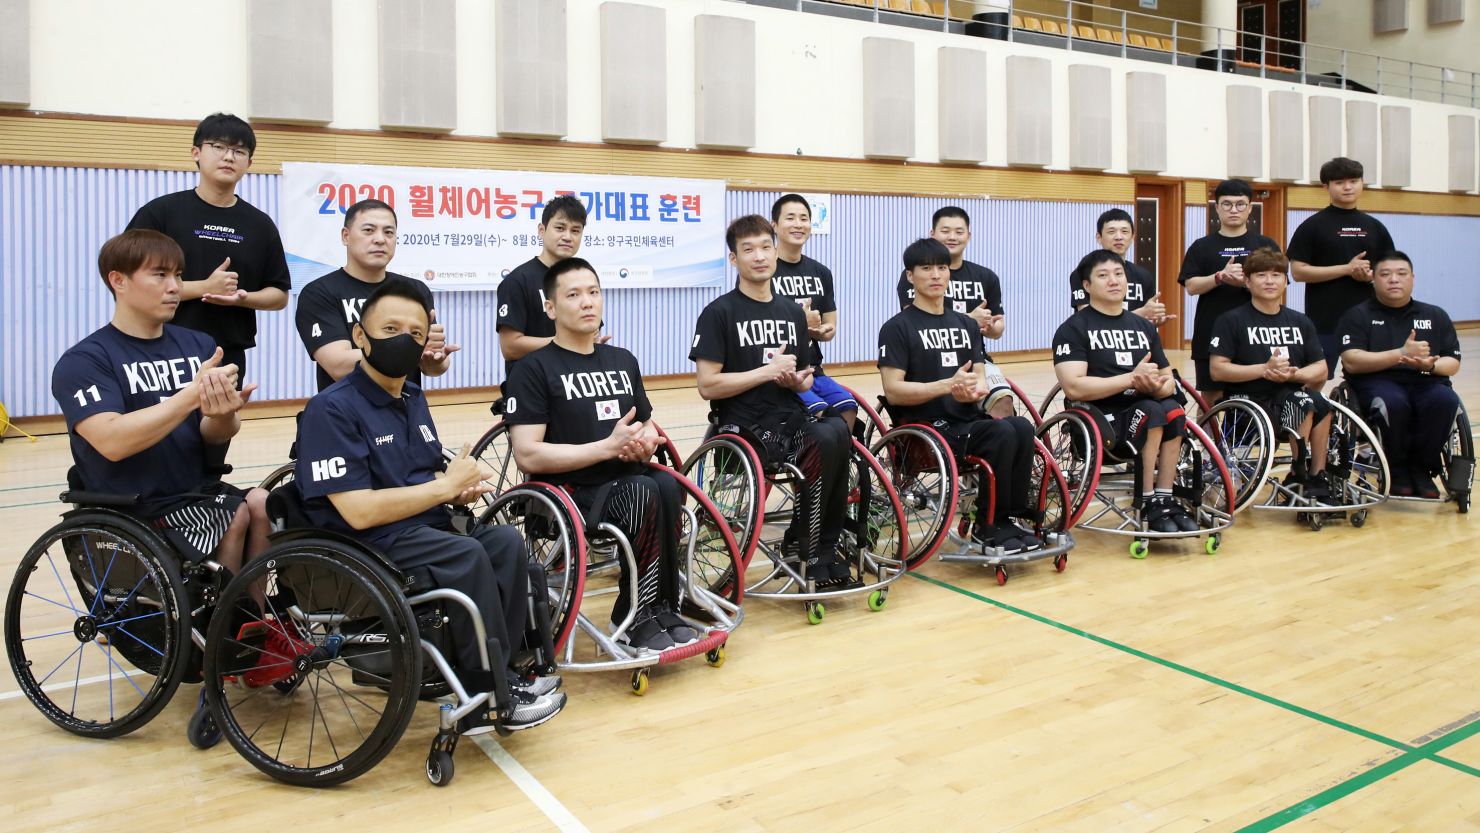 South Korean wheelchair basketball team and Han Sa-hyun (far left, front row) expressing gratitude to medical staff in sign language during the Covid-19 pandemic as they gathered for Paralympics training.
